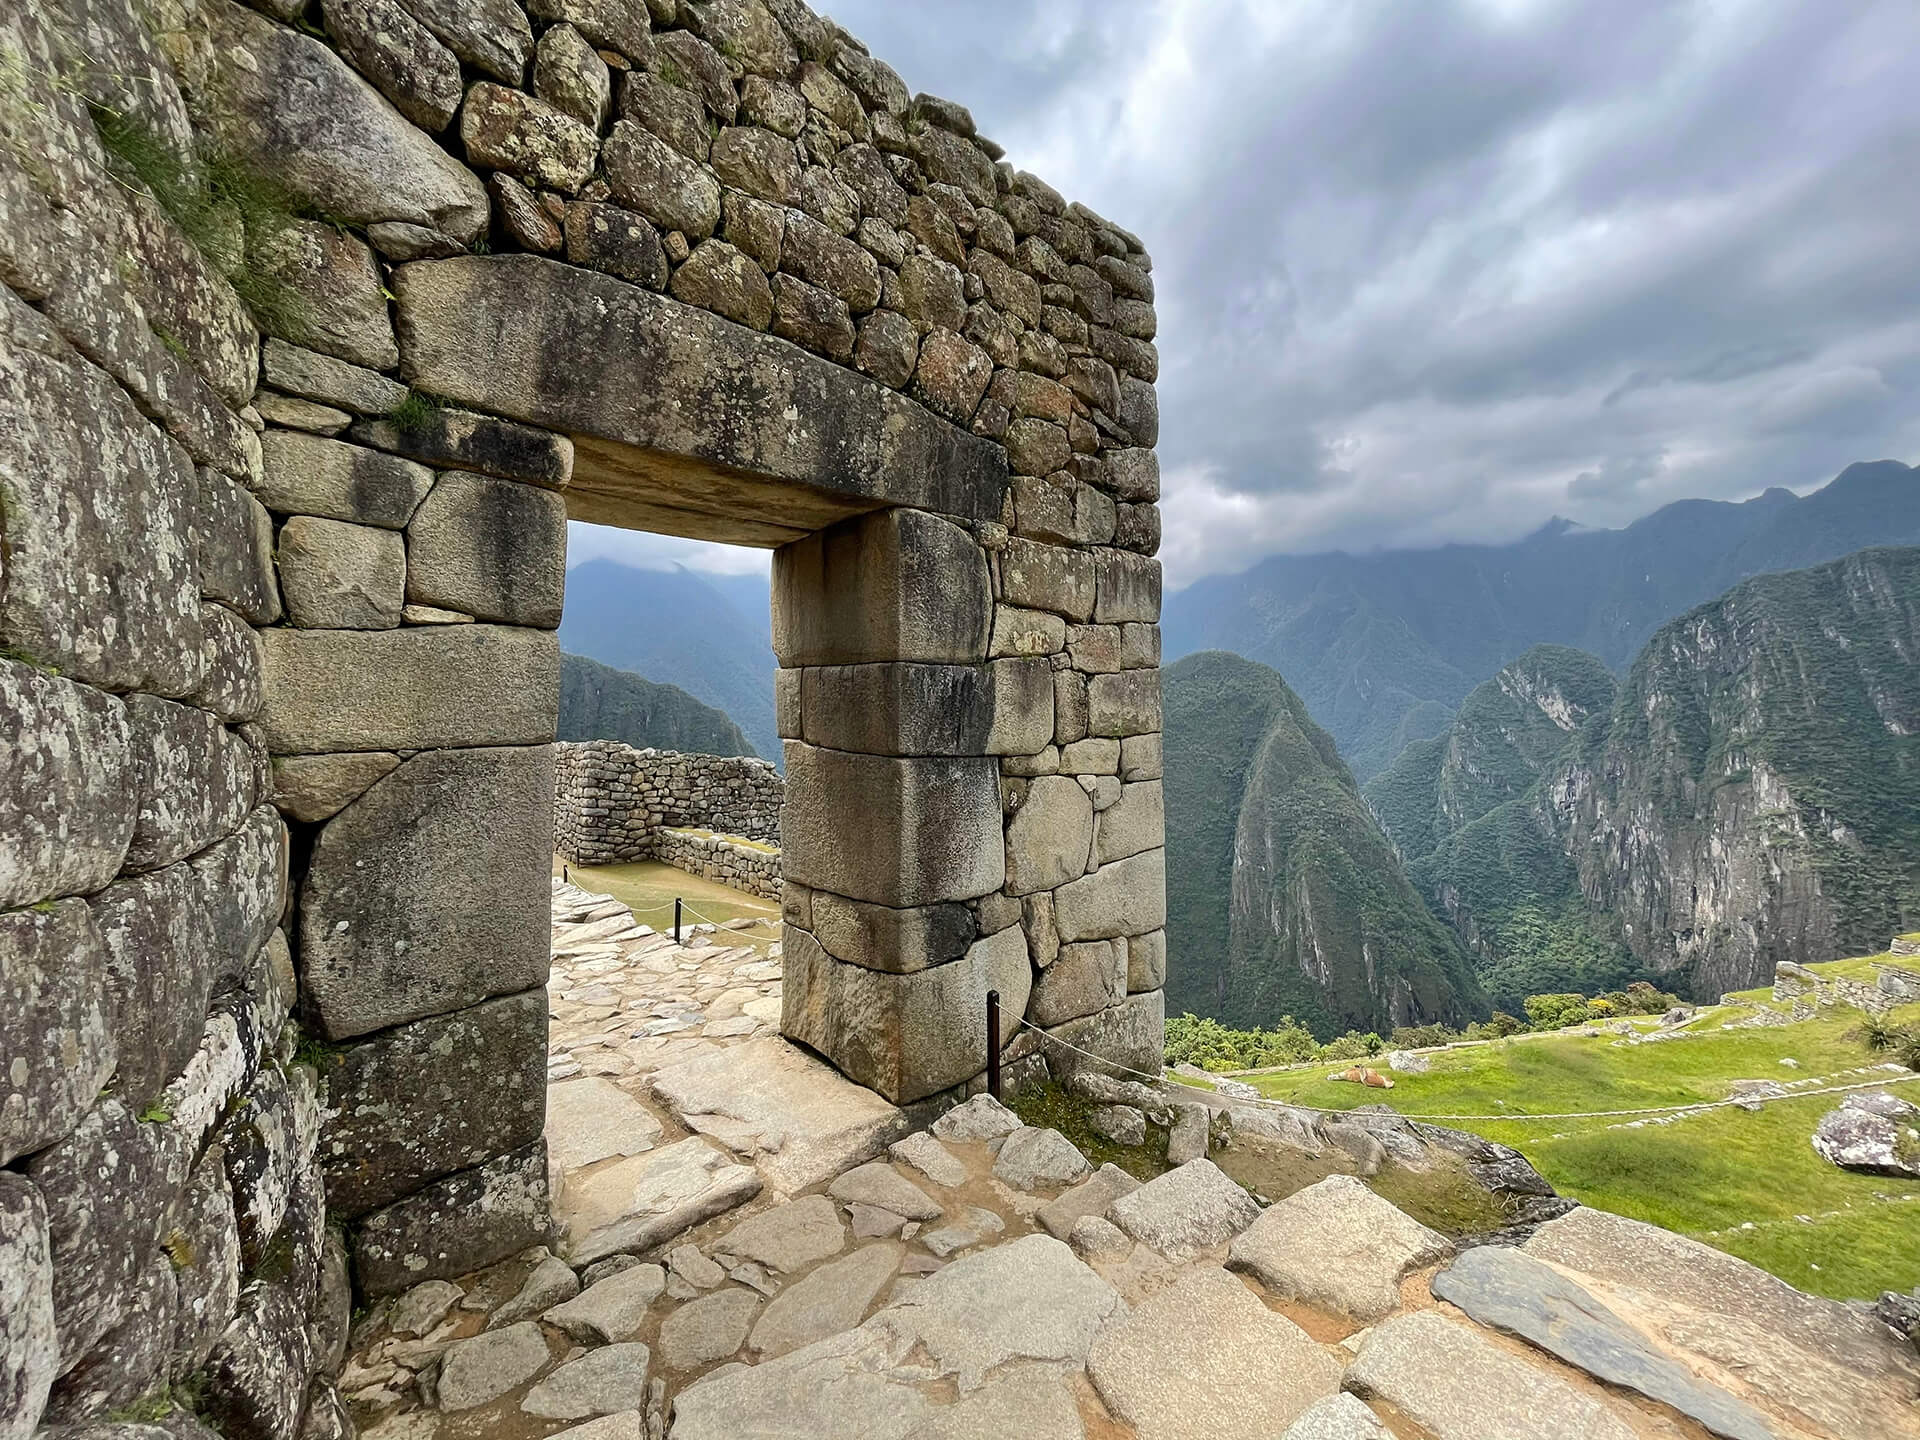 The stone gate of Machu Picchu is the real access to the citadel | RESPONSible Travel Peru